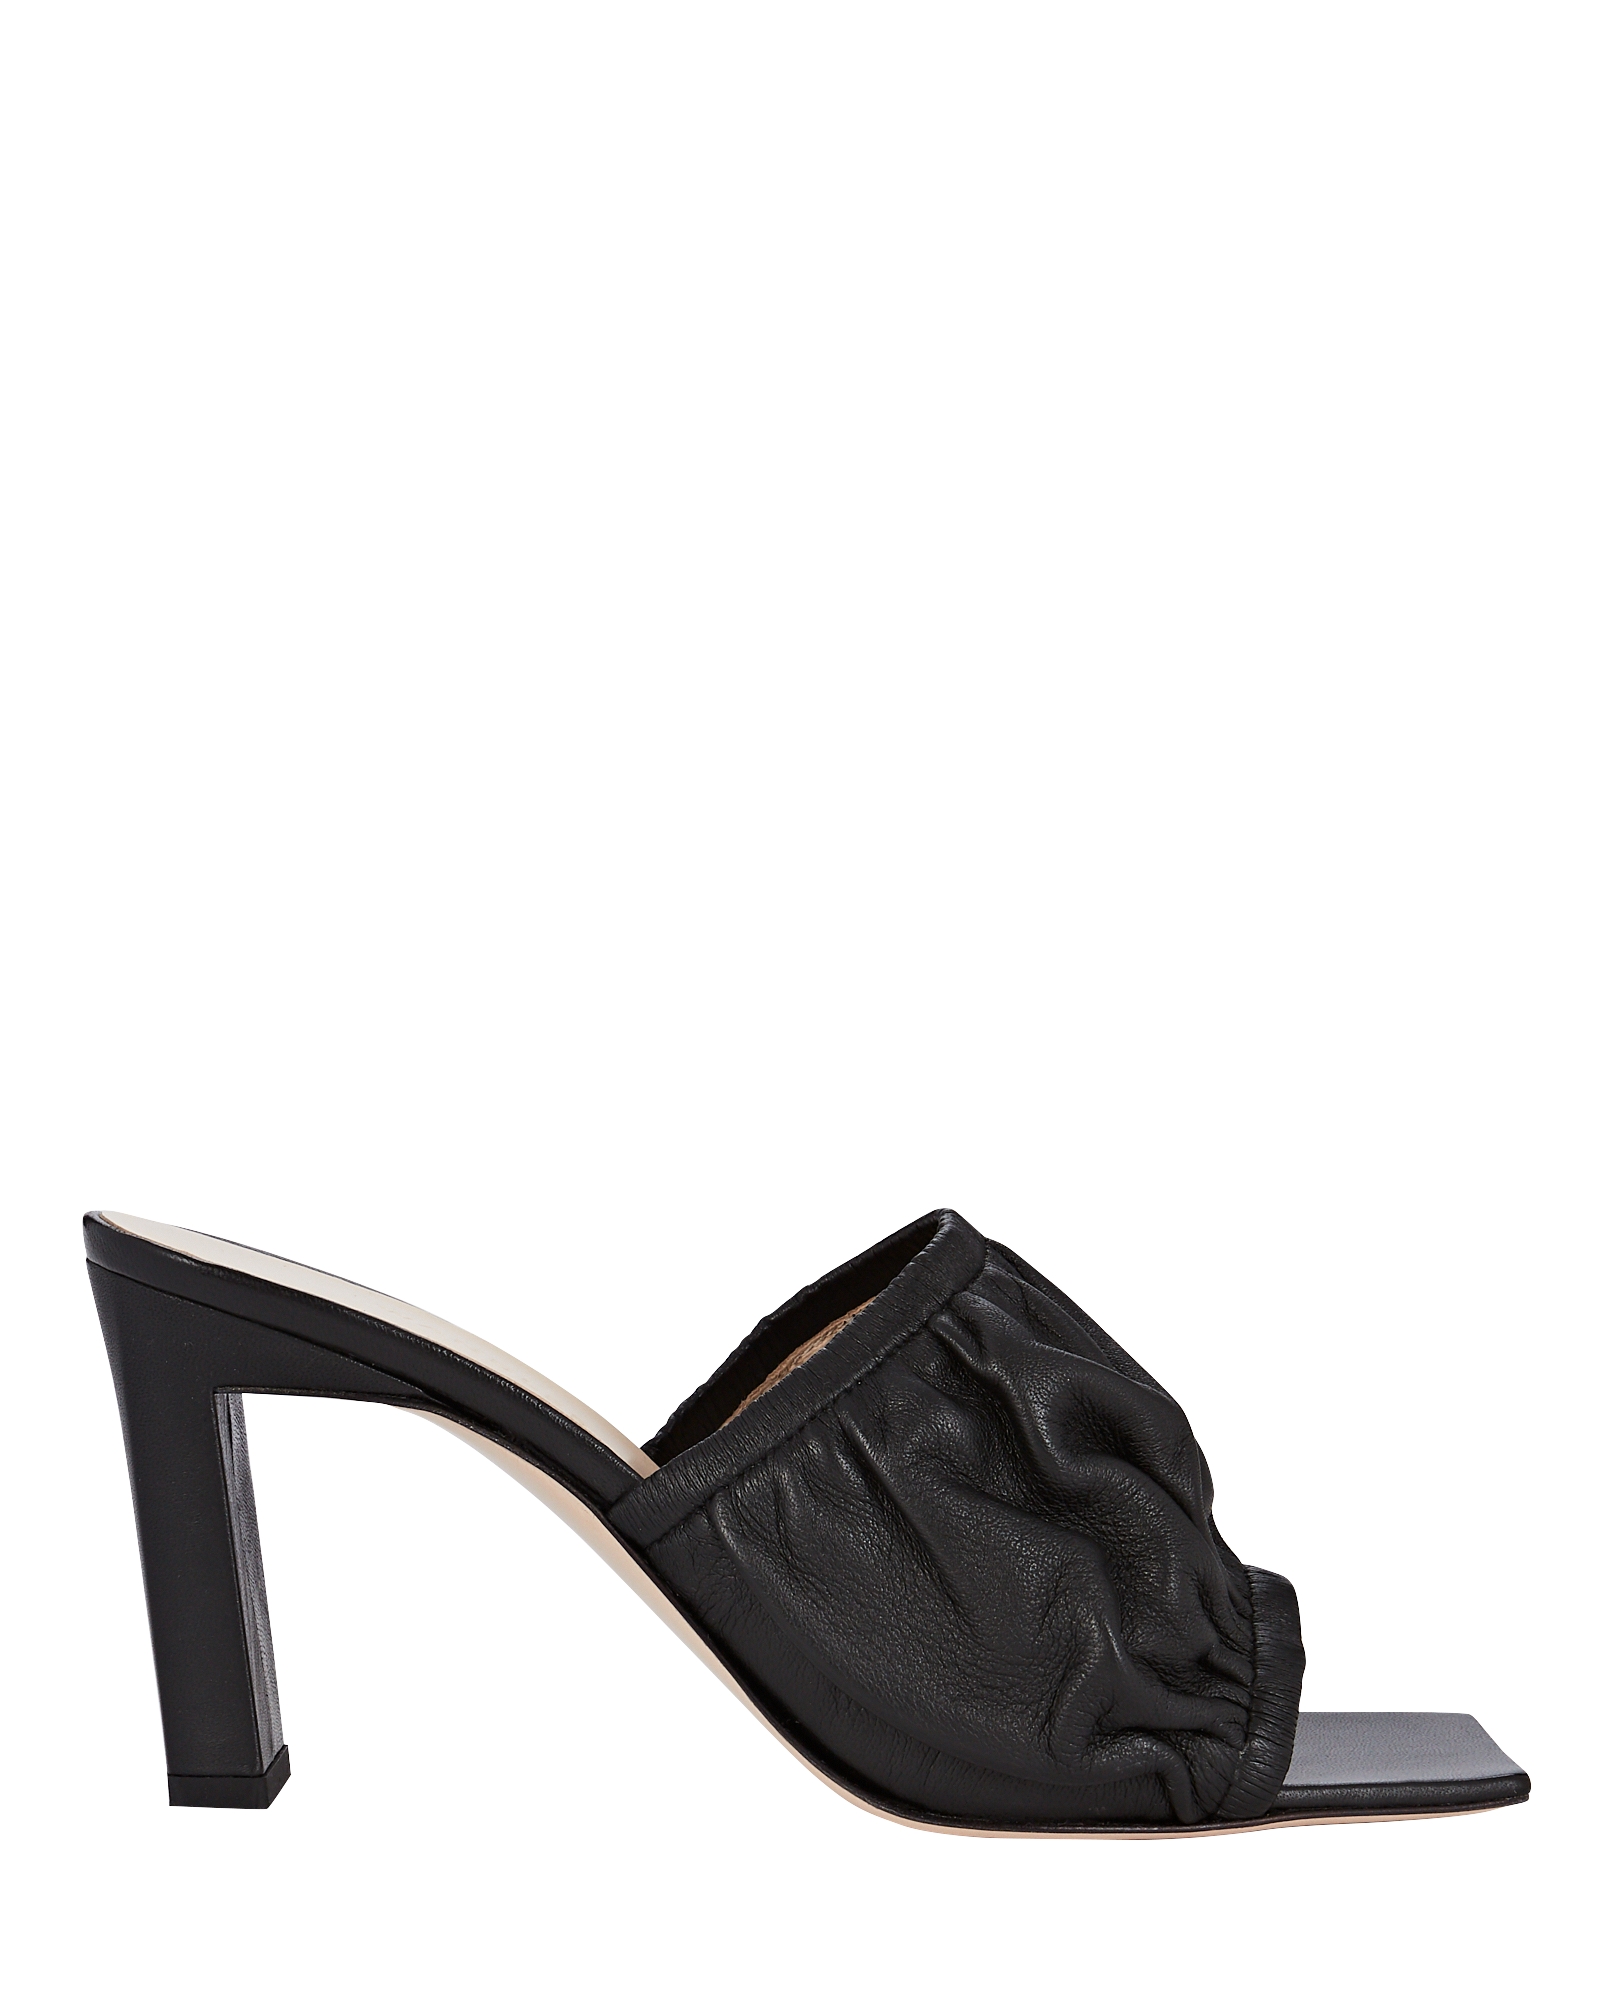 Wandler Ava Ruched Leather Mules | INTERMIX®